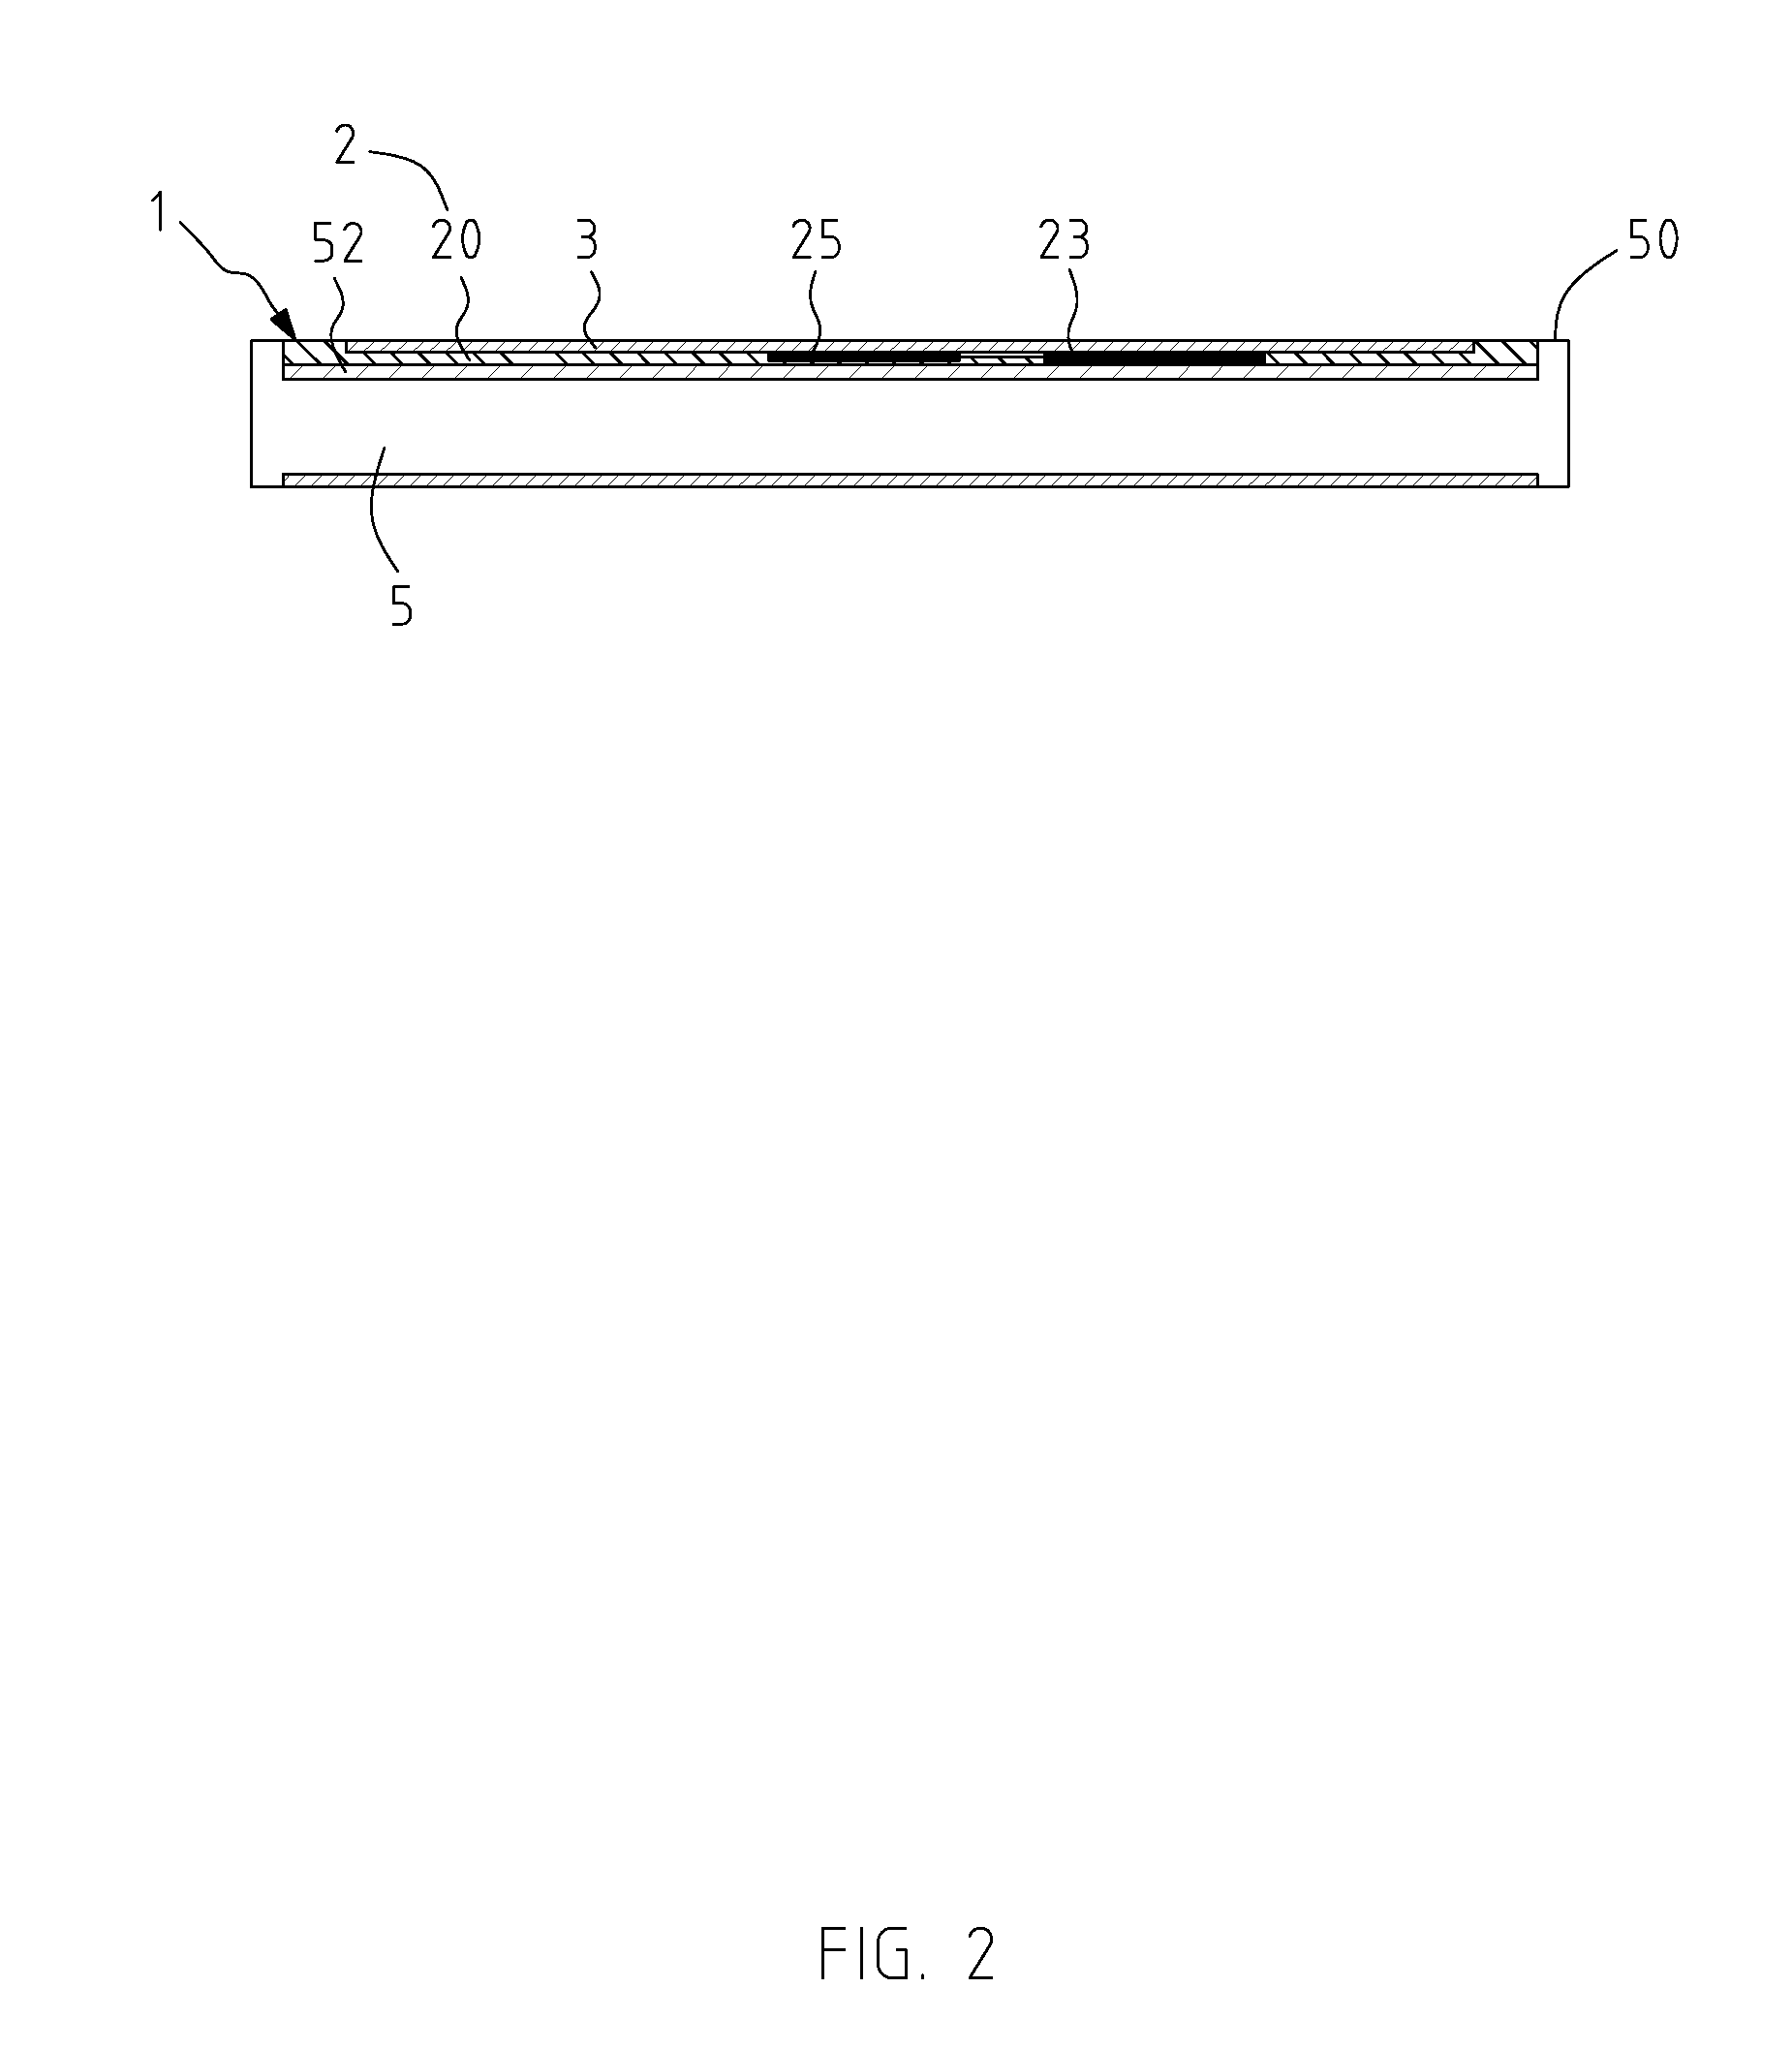 Flash illumination device for use with electronic apparatus or mobile device